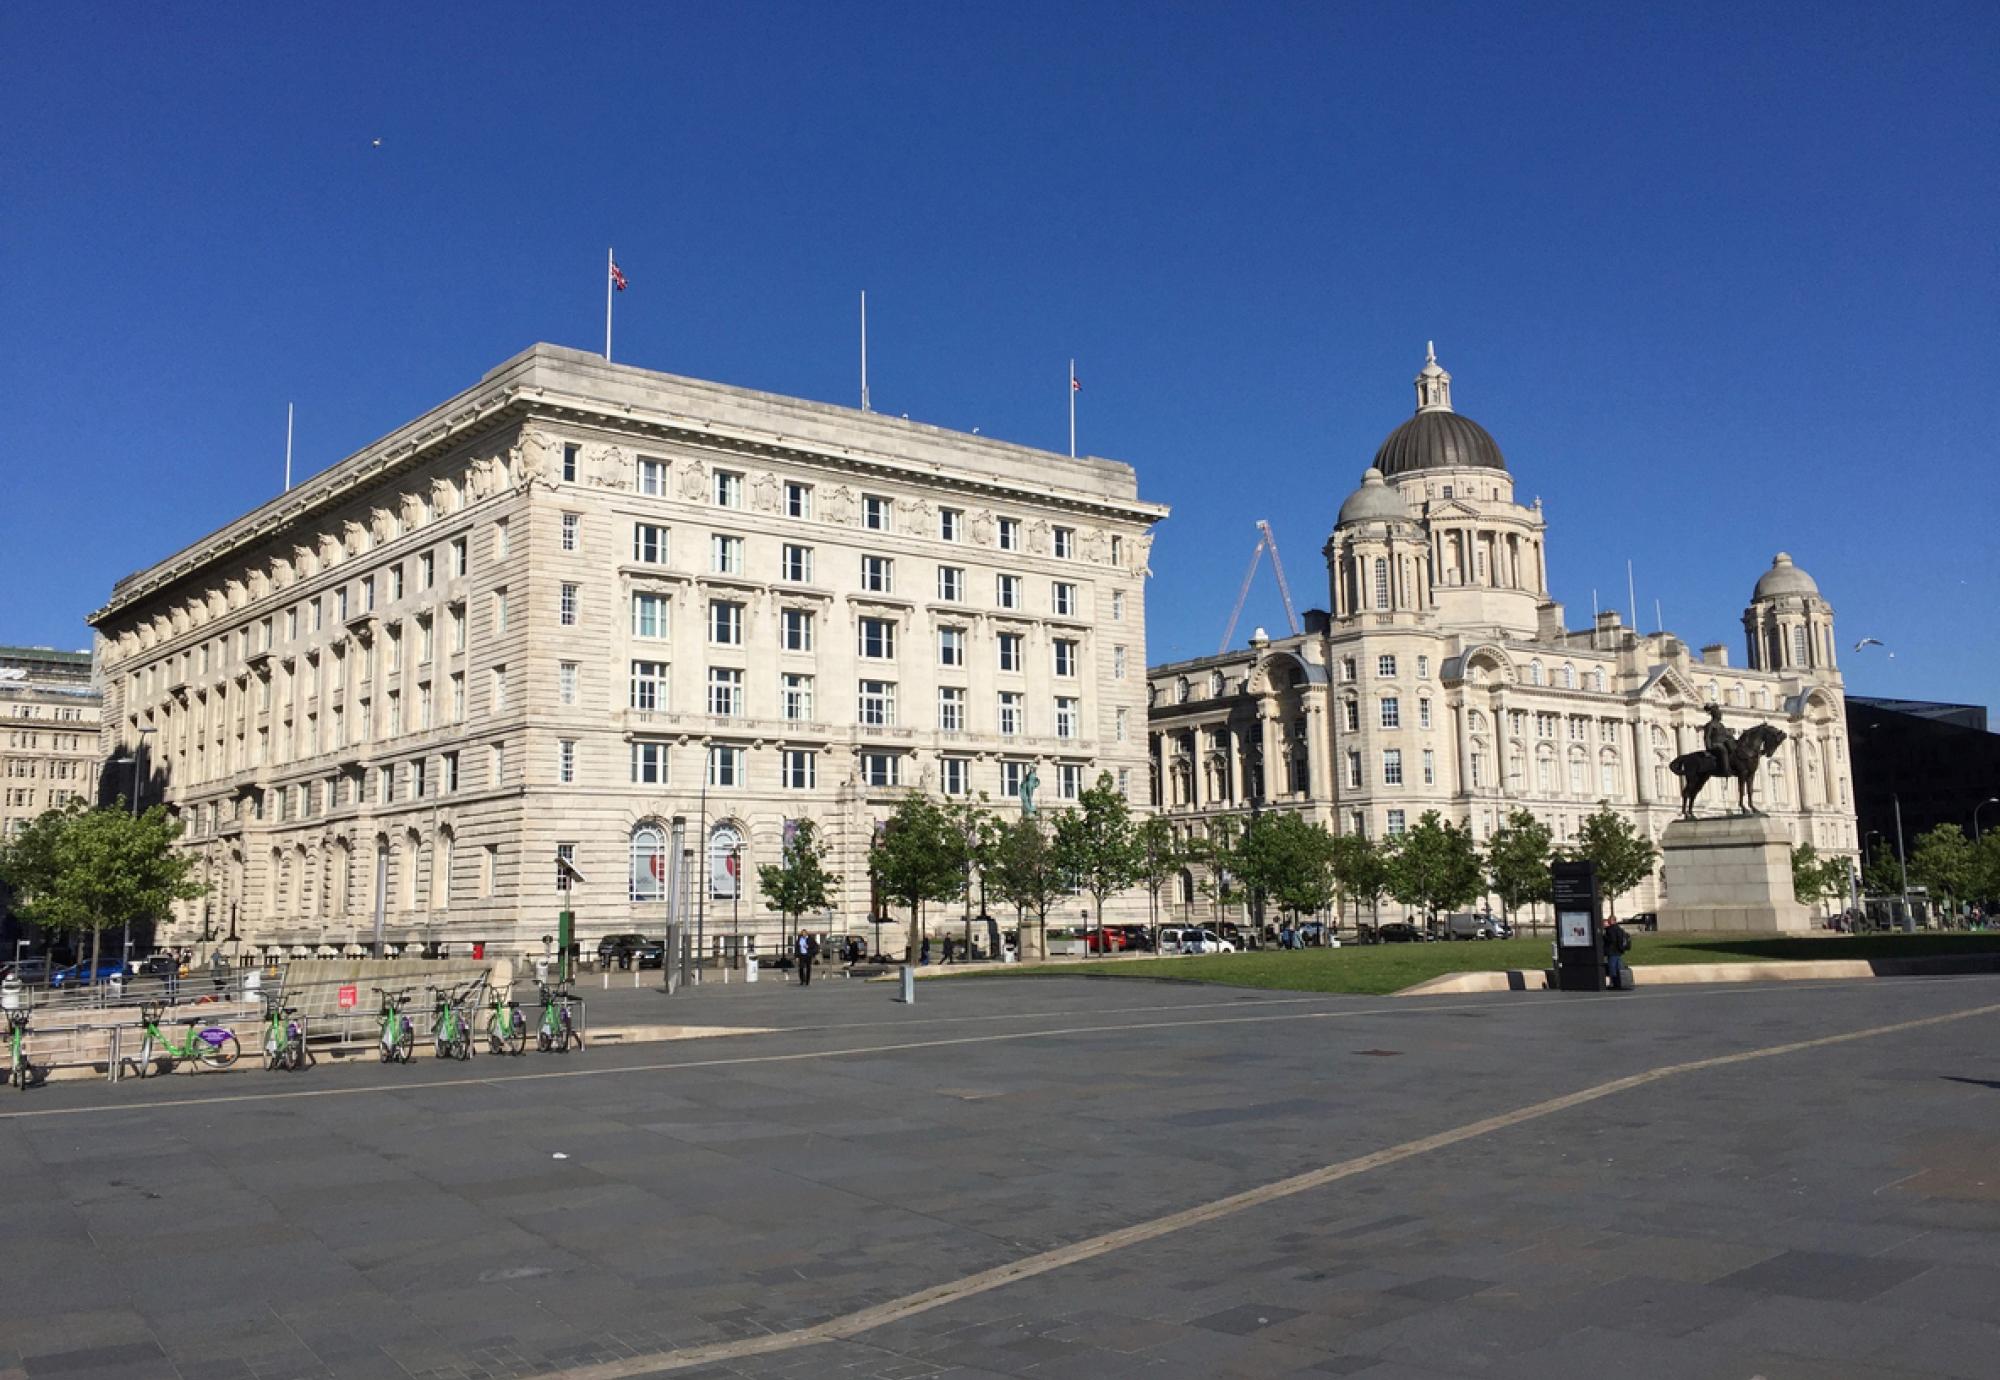 The Cunard and the Port of Liverpool Buildings